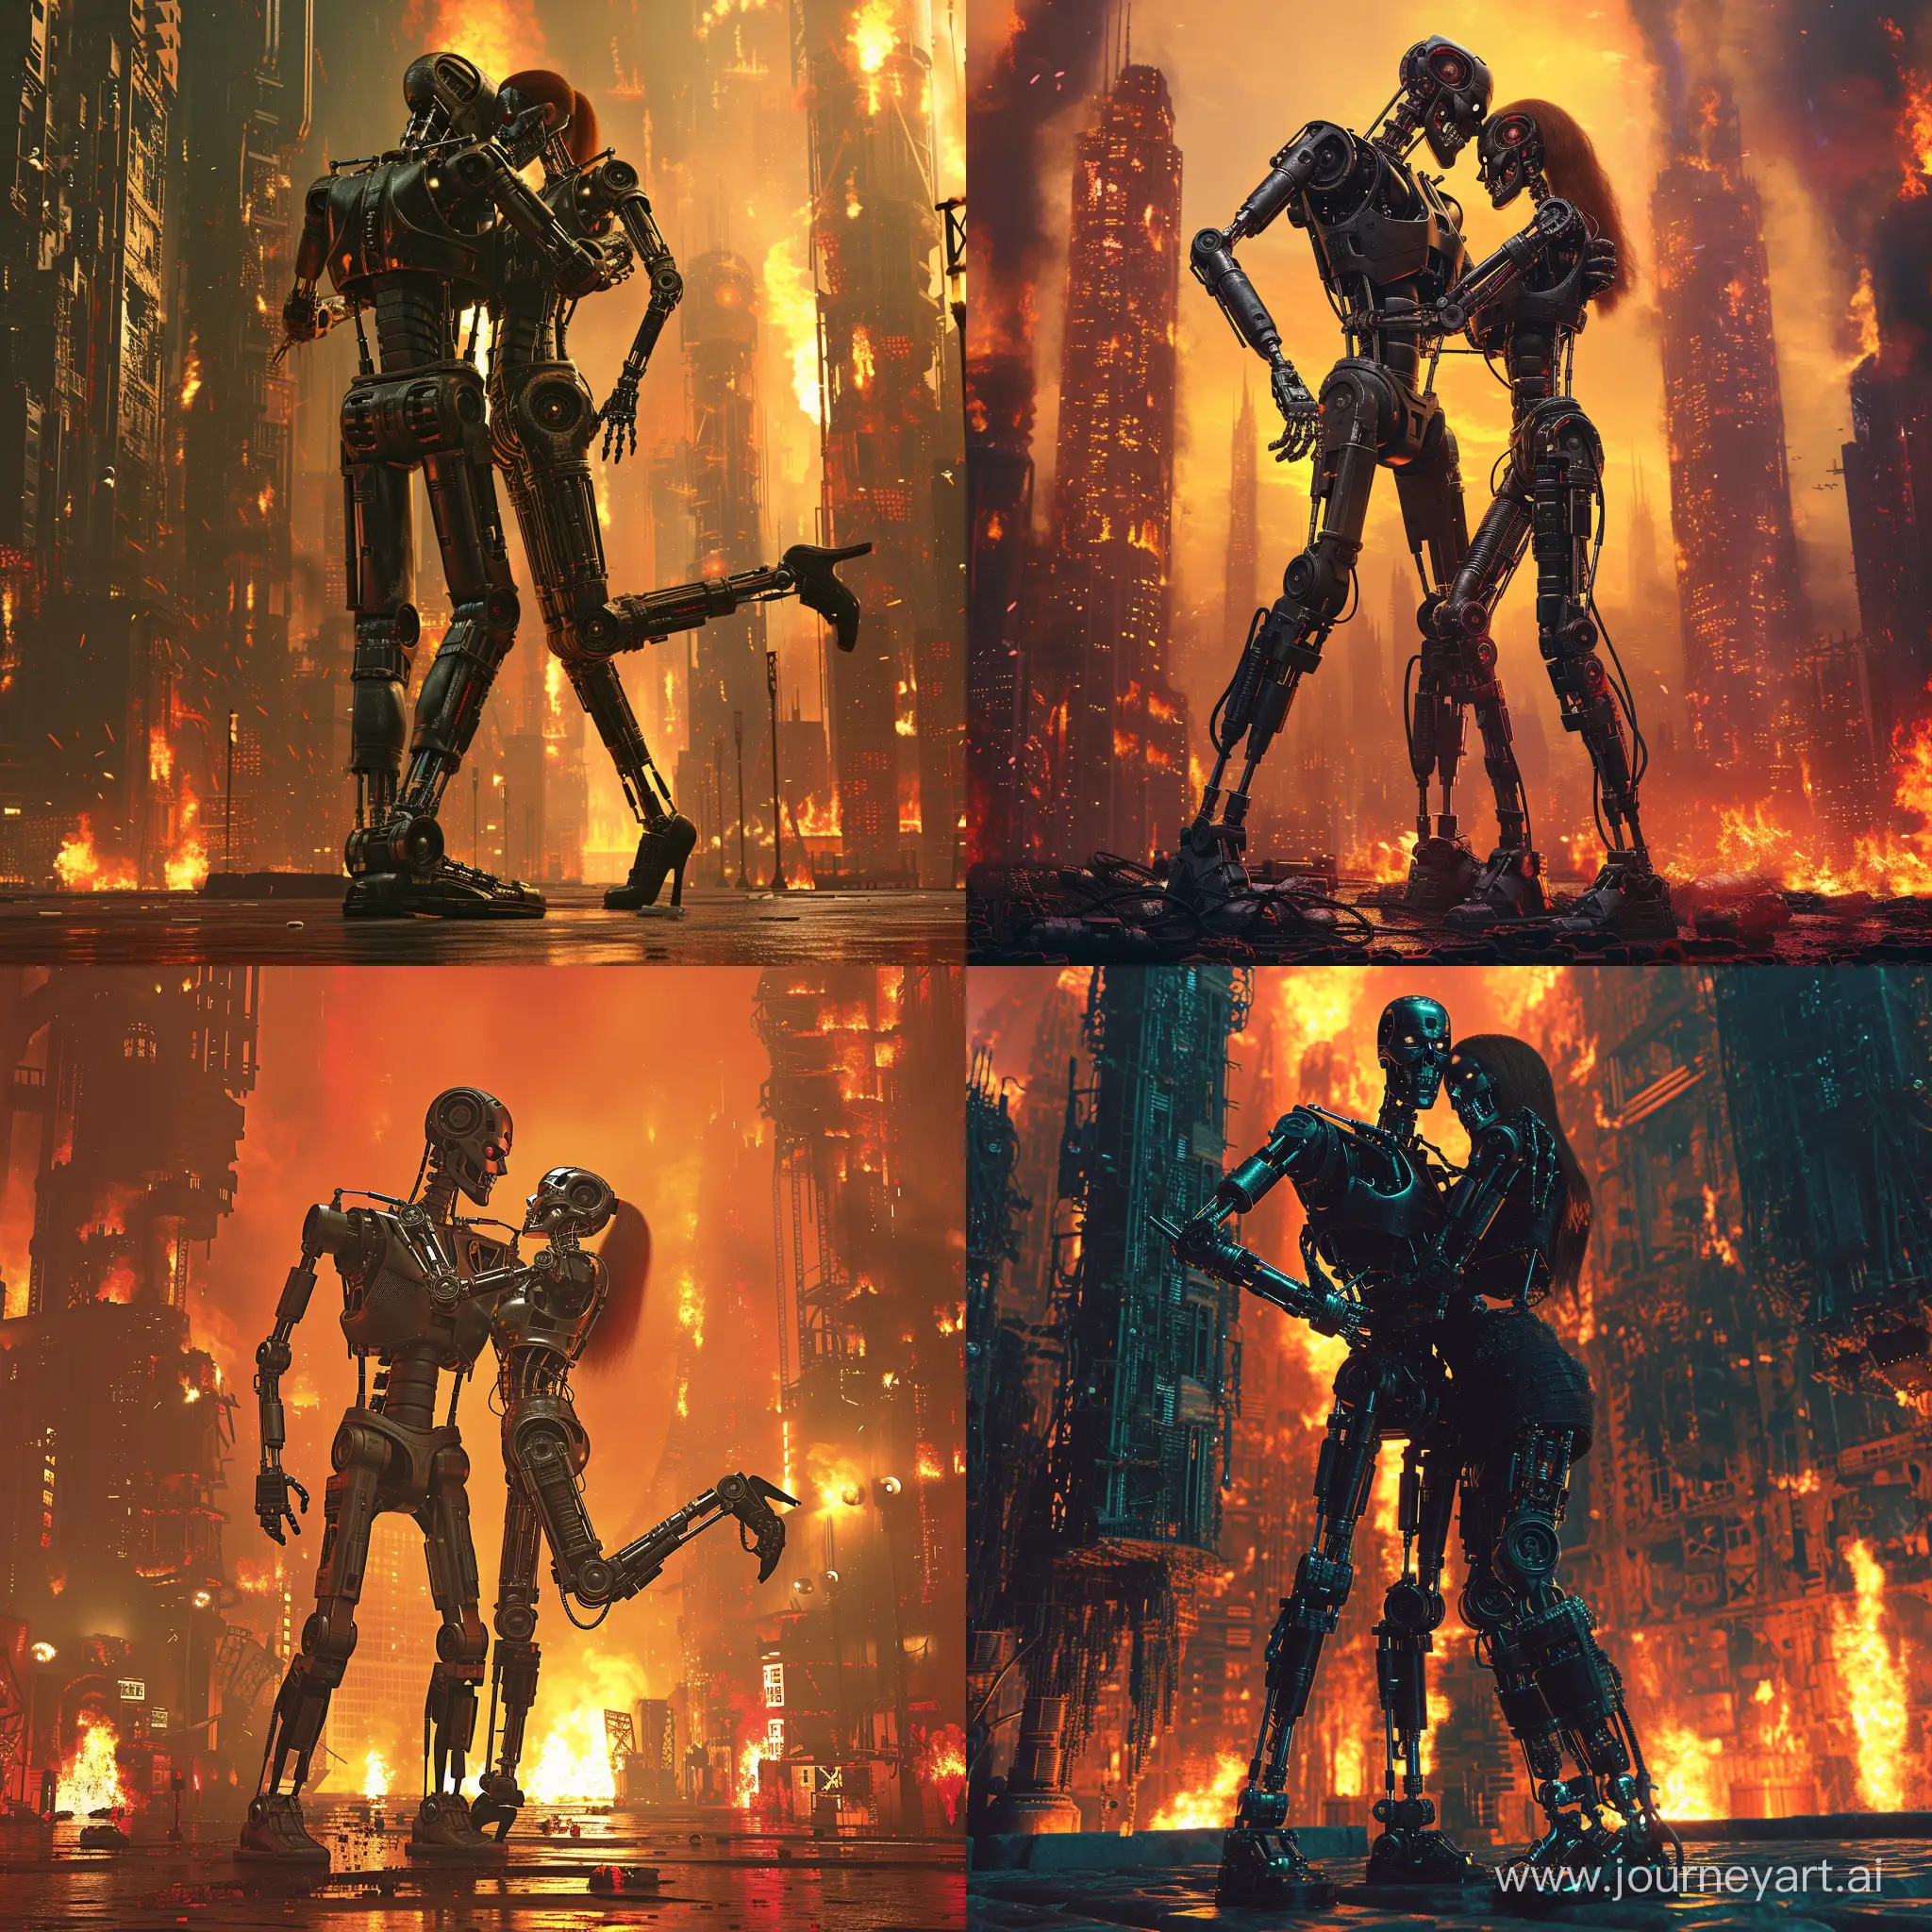 Scene in a burning megalopolis where the towers are collapsing.
Futuristic, dark and gothic atmosphere.
A male terminator robot falls in love with a female terminator robot. They will hug each other, each has one leg raised backwards.
Cinema style, ultra detailed, HDR